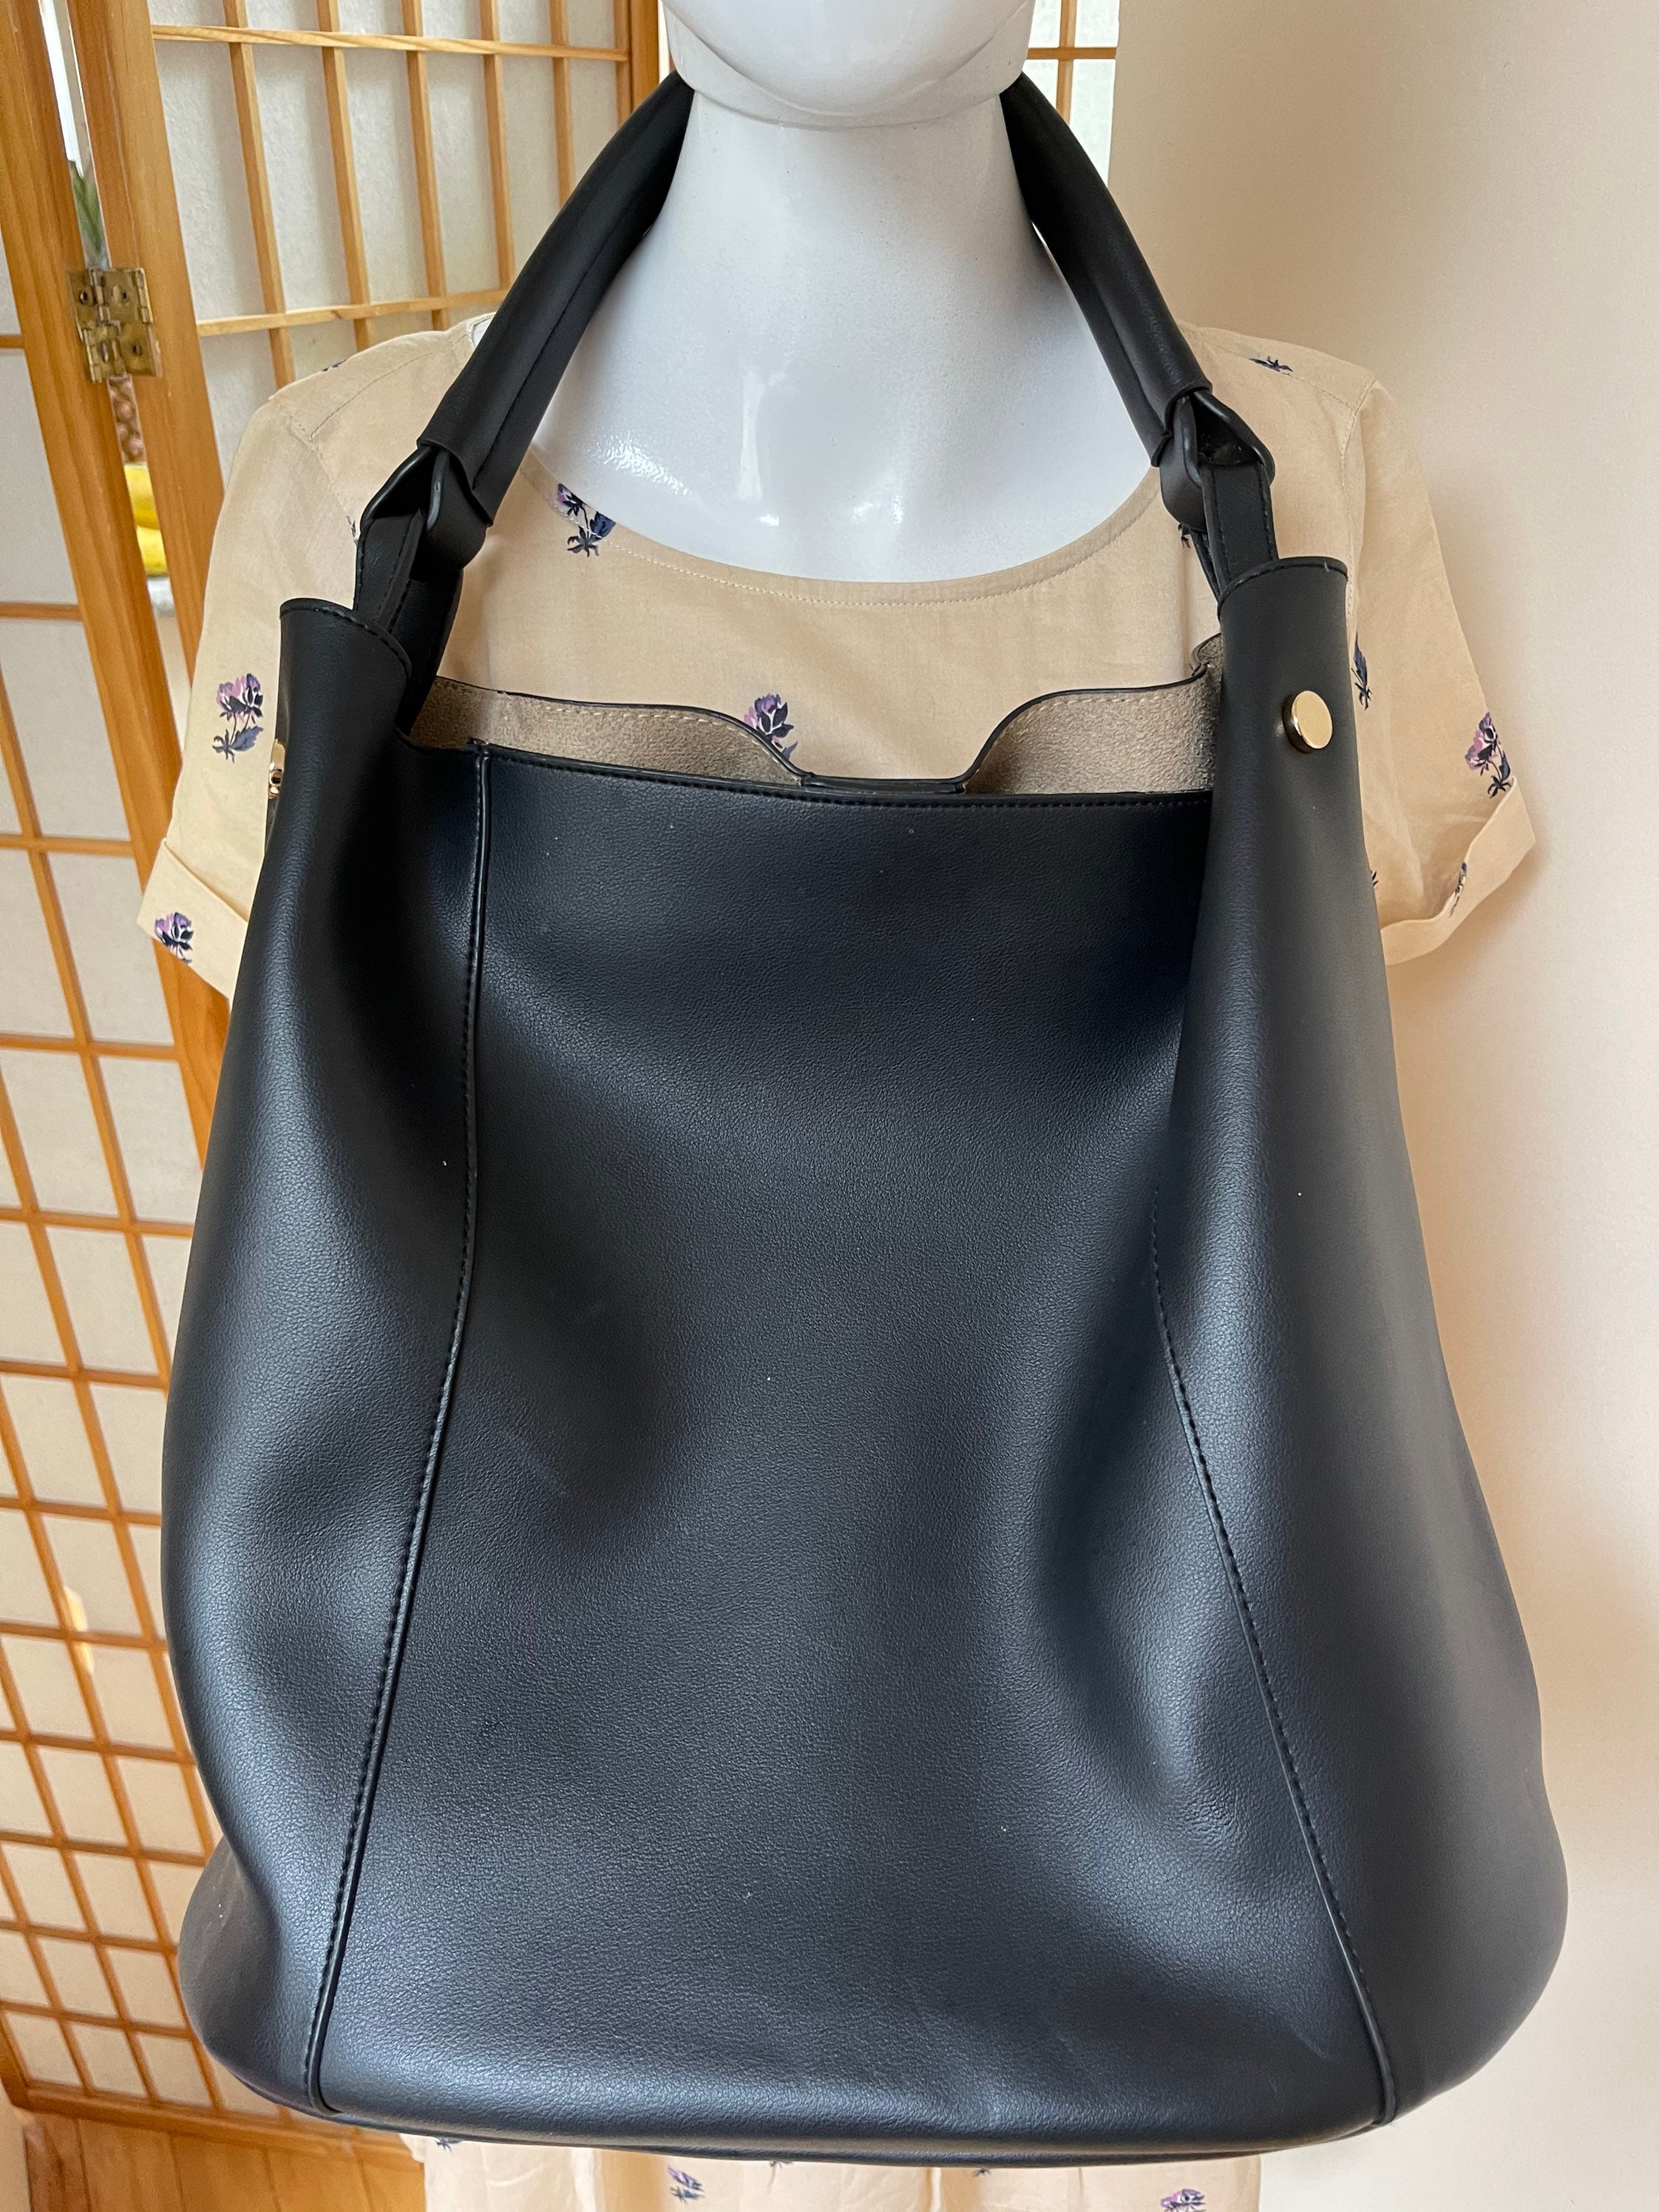 Neiman Marcus Olive Green Tote Shoulder Bag Faux Leather